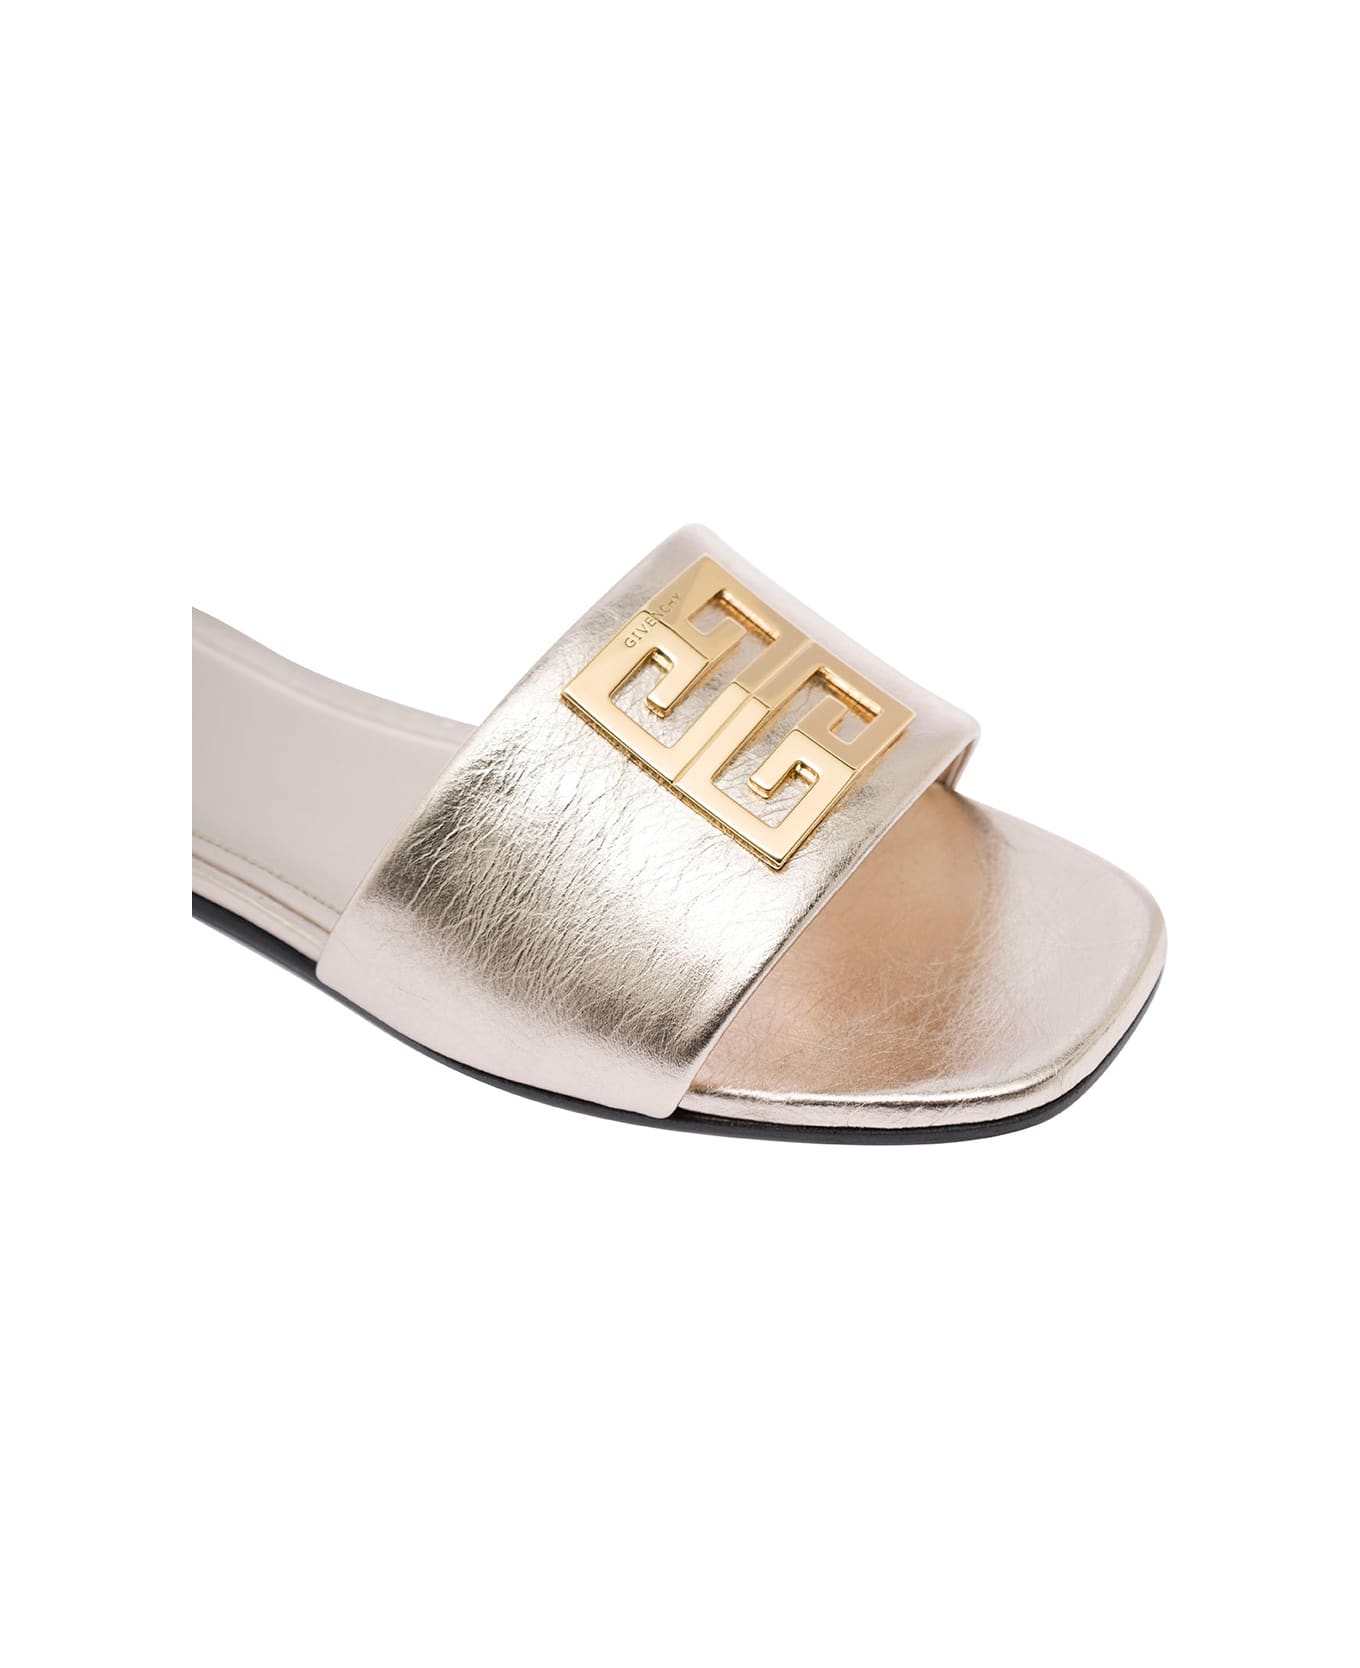 Givenchy Silver Flat Sandals With 4g Detail In Metallic Leather Woman - DUSTY GOLD